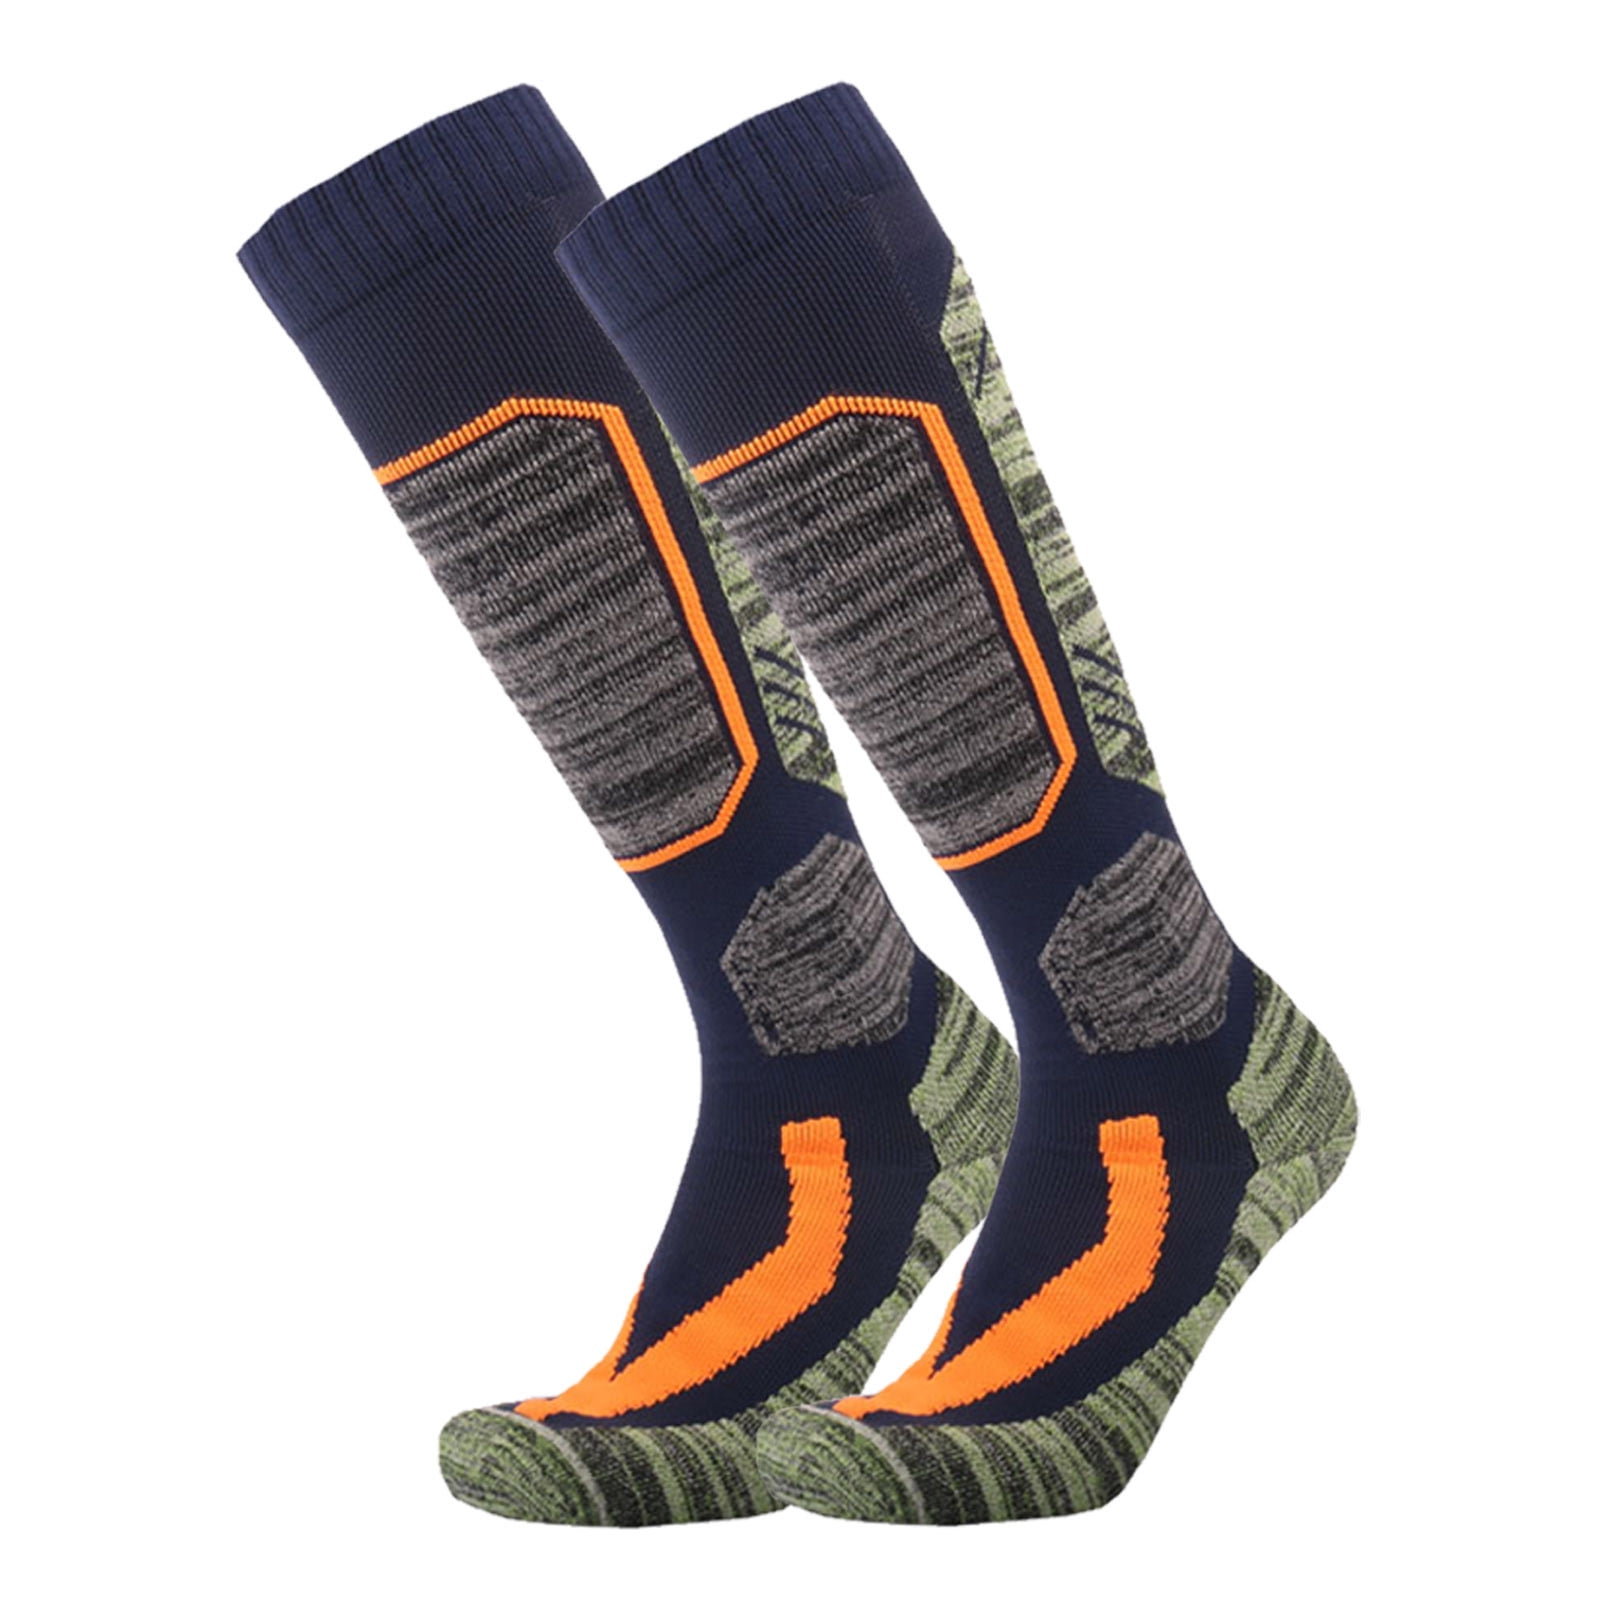 Kodal Copper Infused Crew Socks Business Athletic Moisture Wicking Odor  Free Comfortable for All Day Wear (4/5 Pairs)